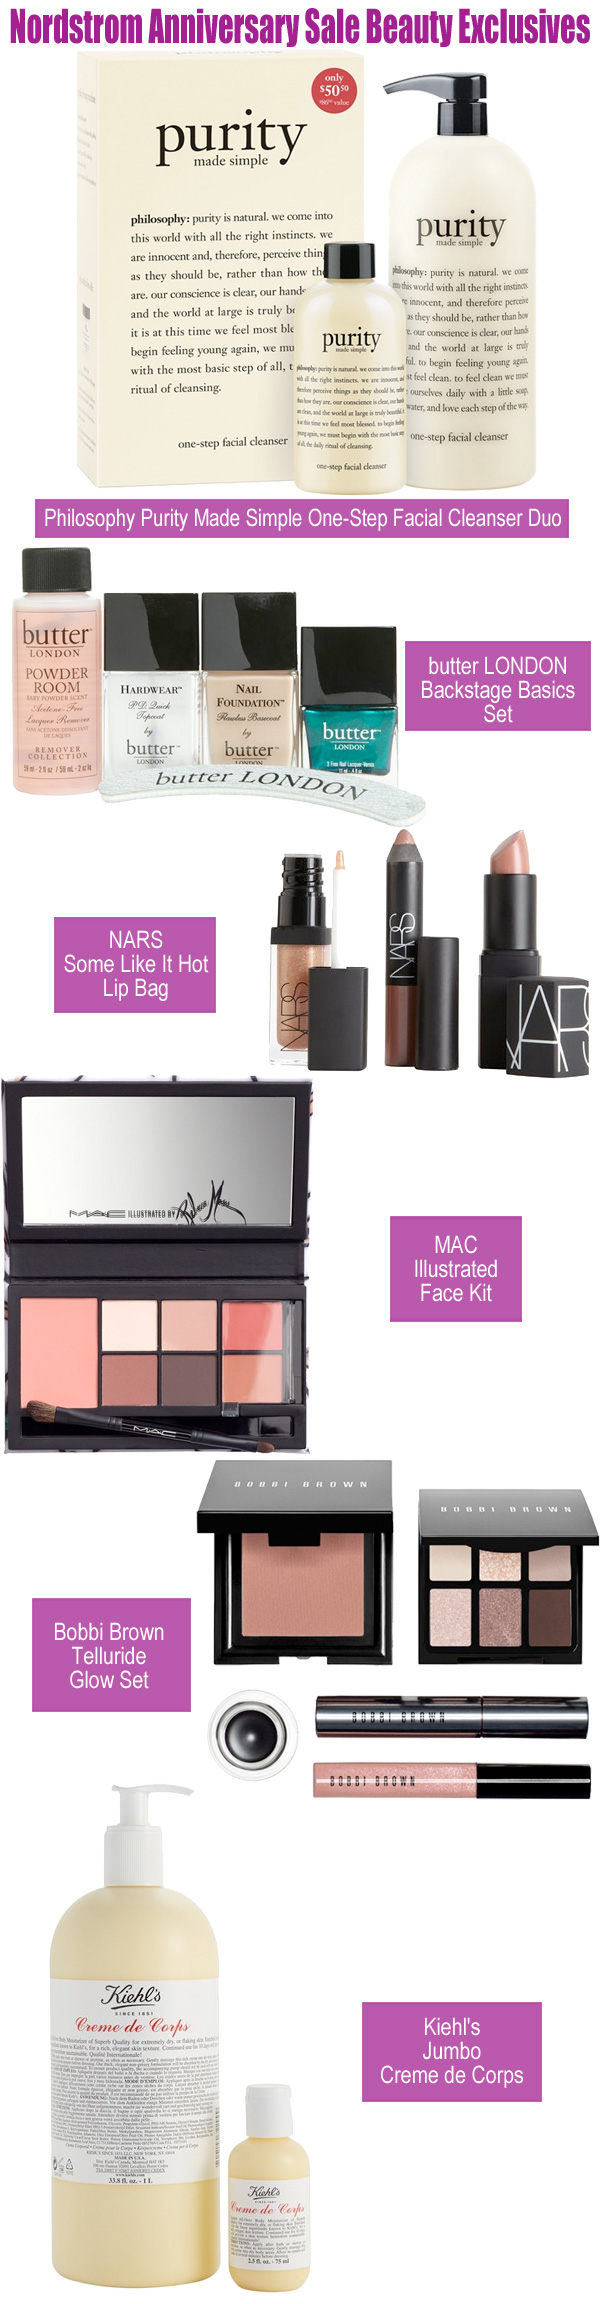 Nordstrom Anniversary Sale Beauty Exclusives 2013